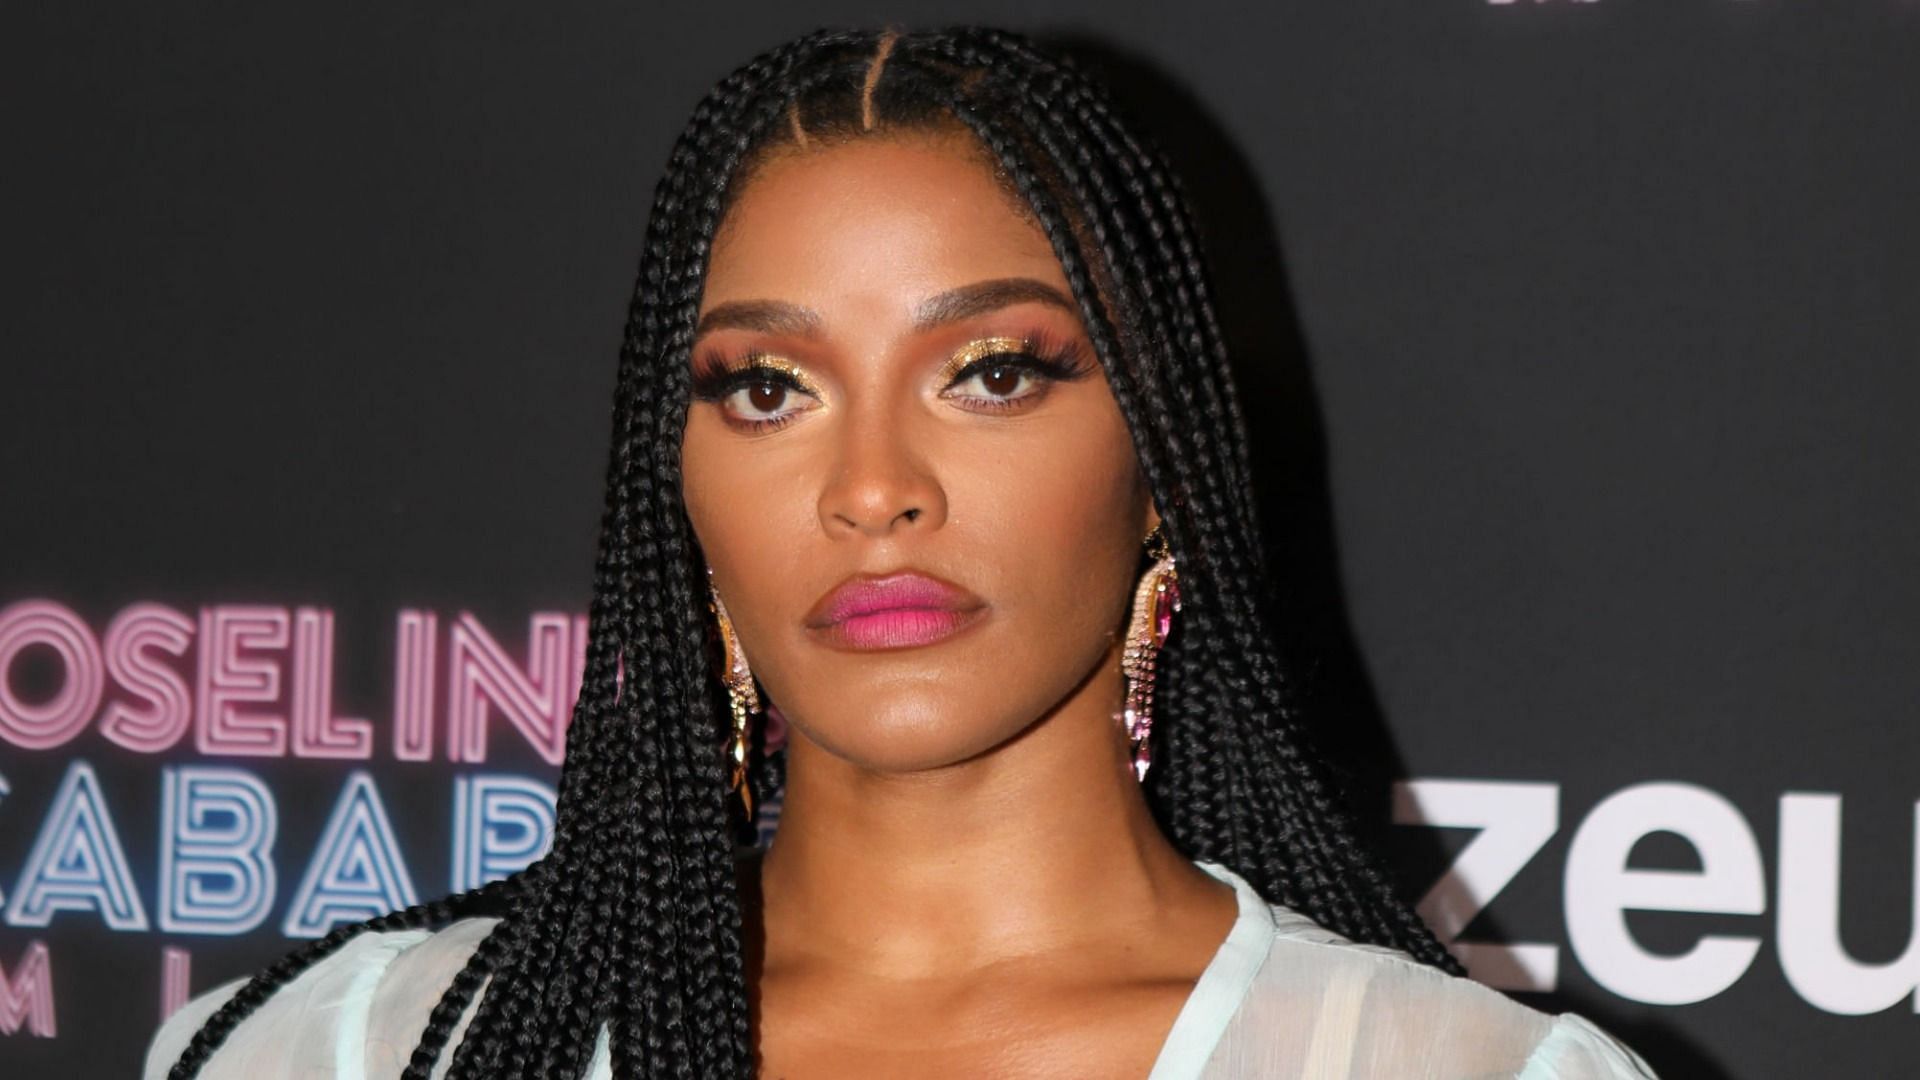 Puerto Rican rapper Joseline Hernandez&#039;s song snippet started &#039;I Wanna Ride&#039; trend on TikTok (Image via Thaddaeus McAdams/Getty Images)